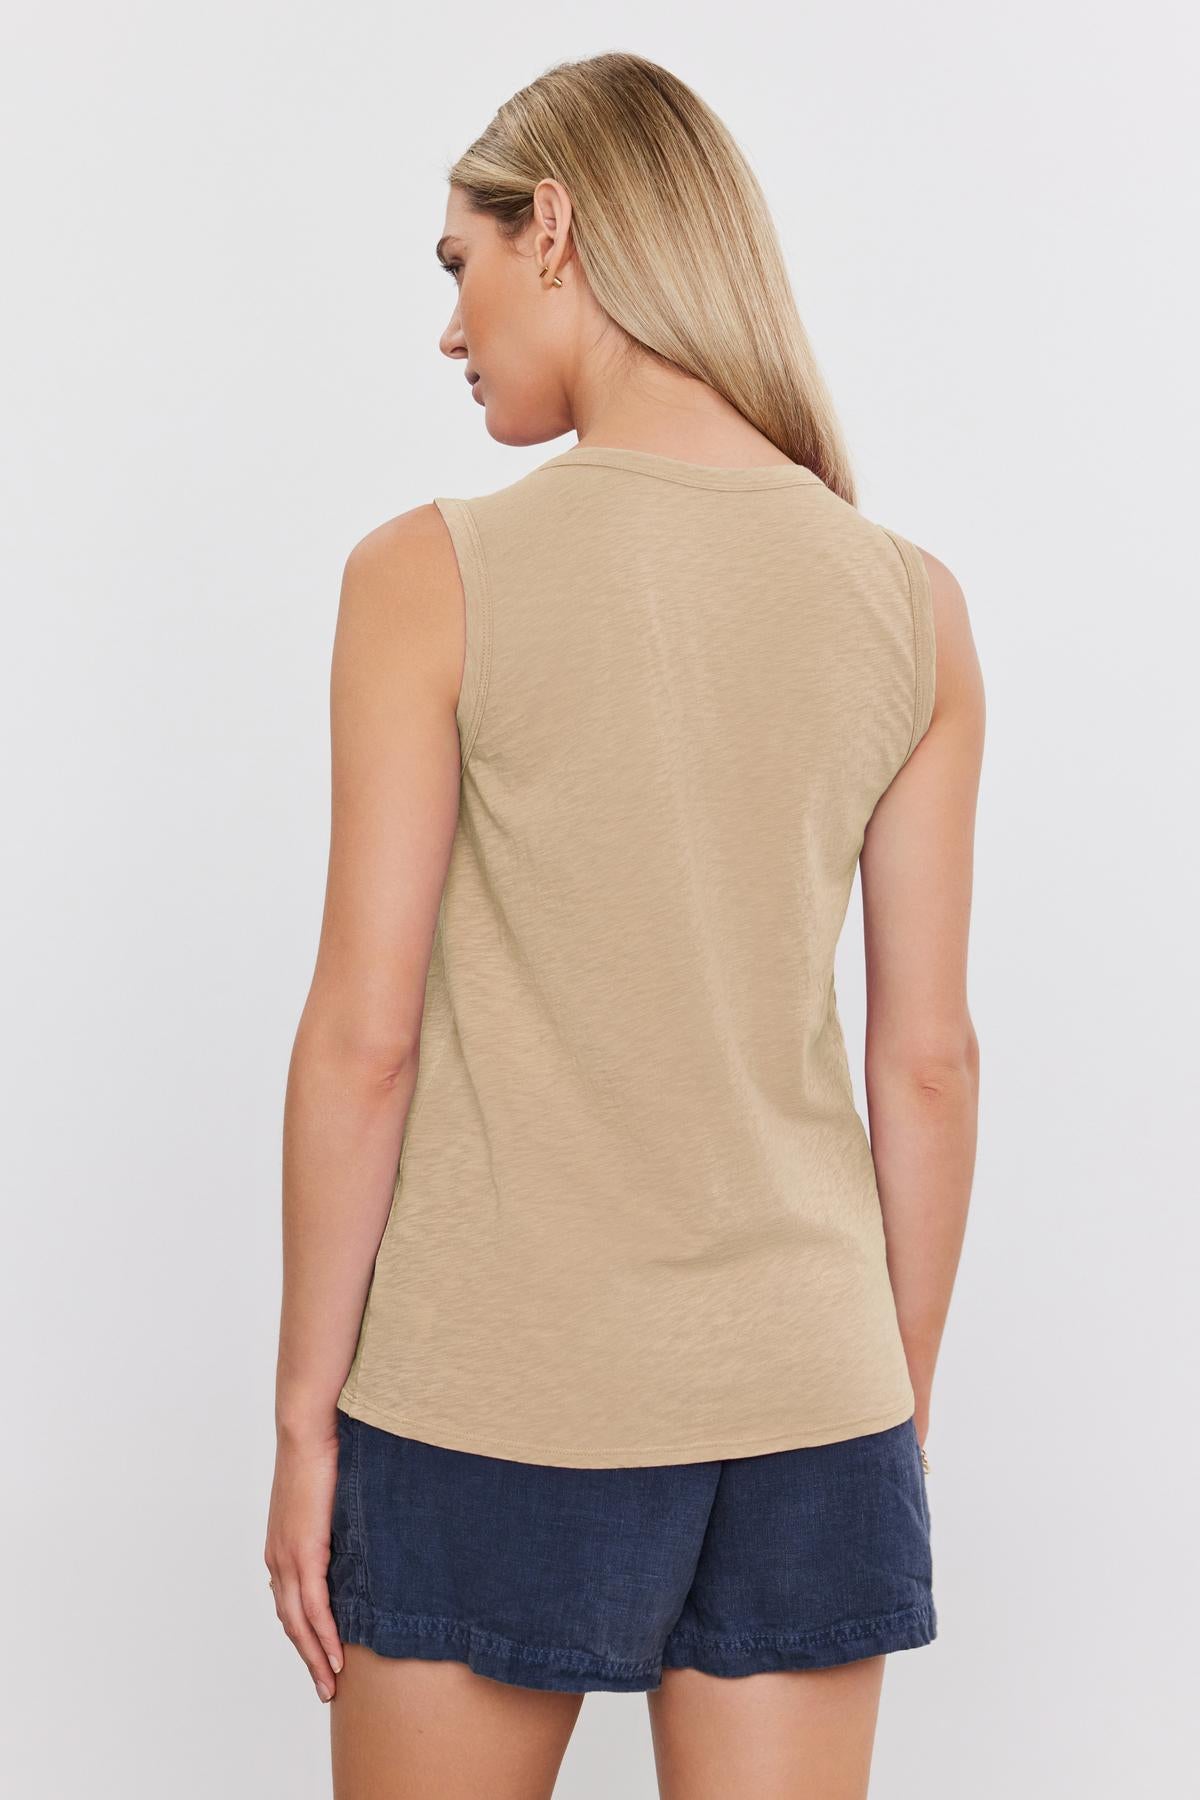 Woman wearing a beige TAURUS COTTON SLUB TANK and denim shorts, seen from the back, standing against a white background. (Brand Name: Velvet by Graham & Spencer)-36806822592705